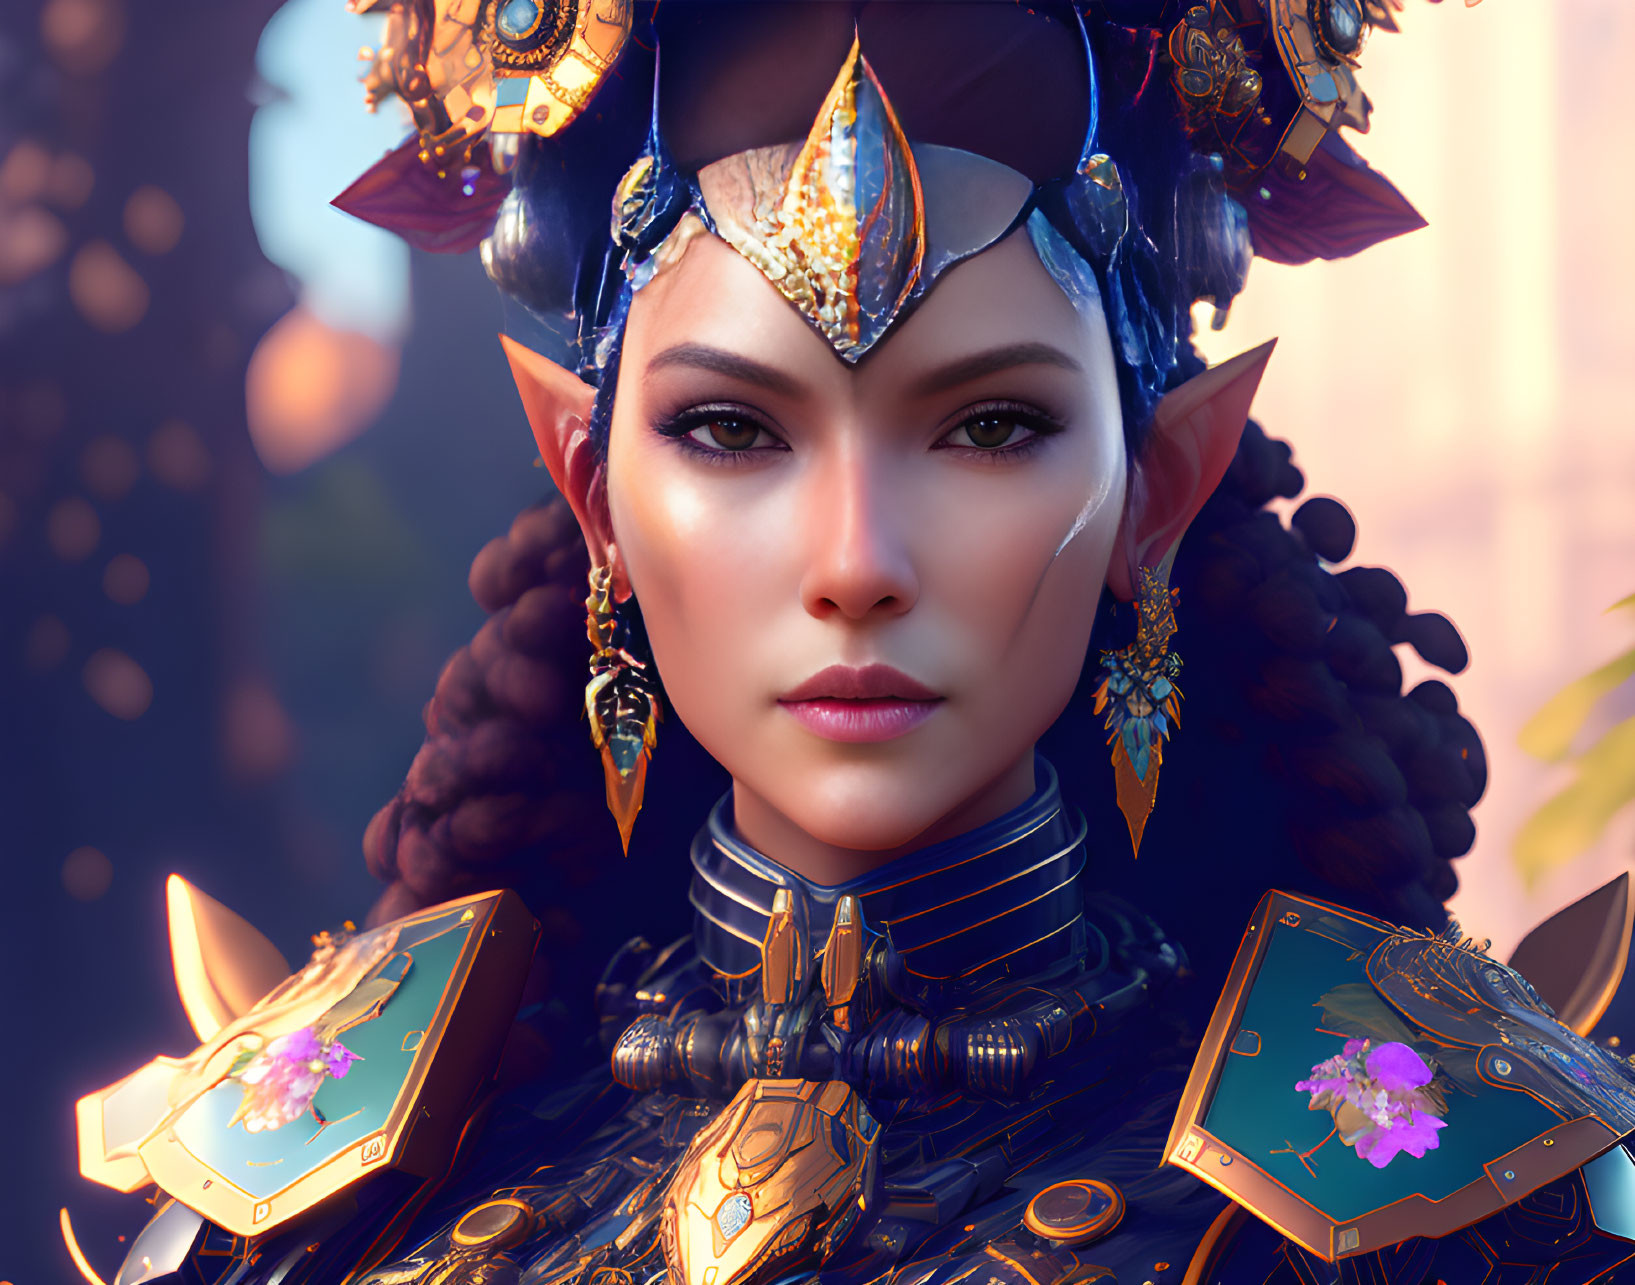 Female elf digital portrait in ornate armor and headdress with gold and jewels on soft-focused background